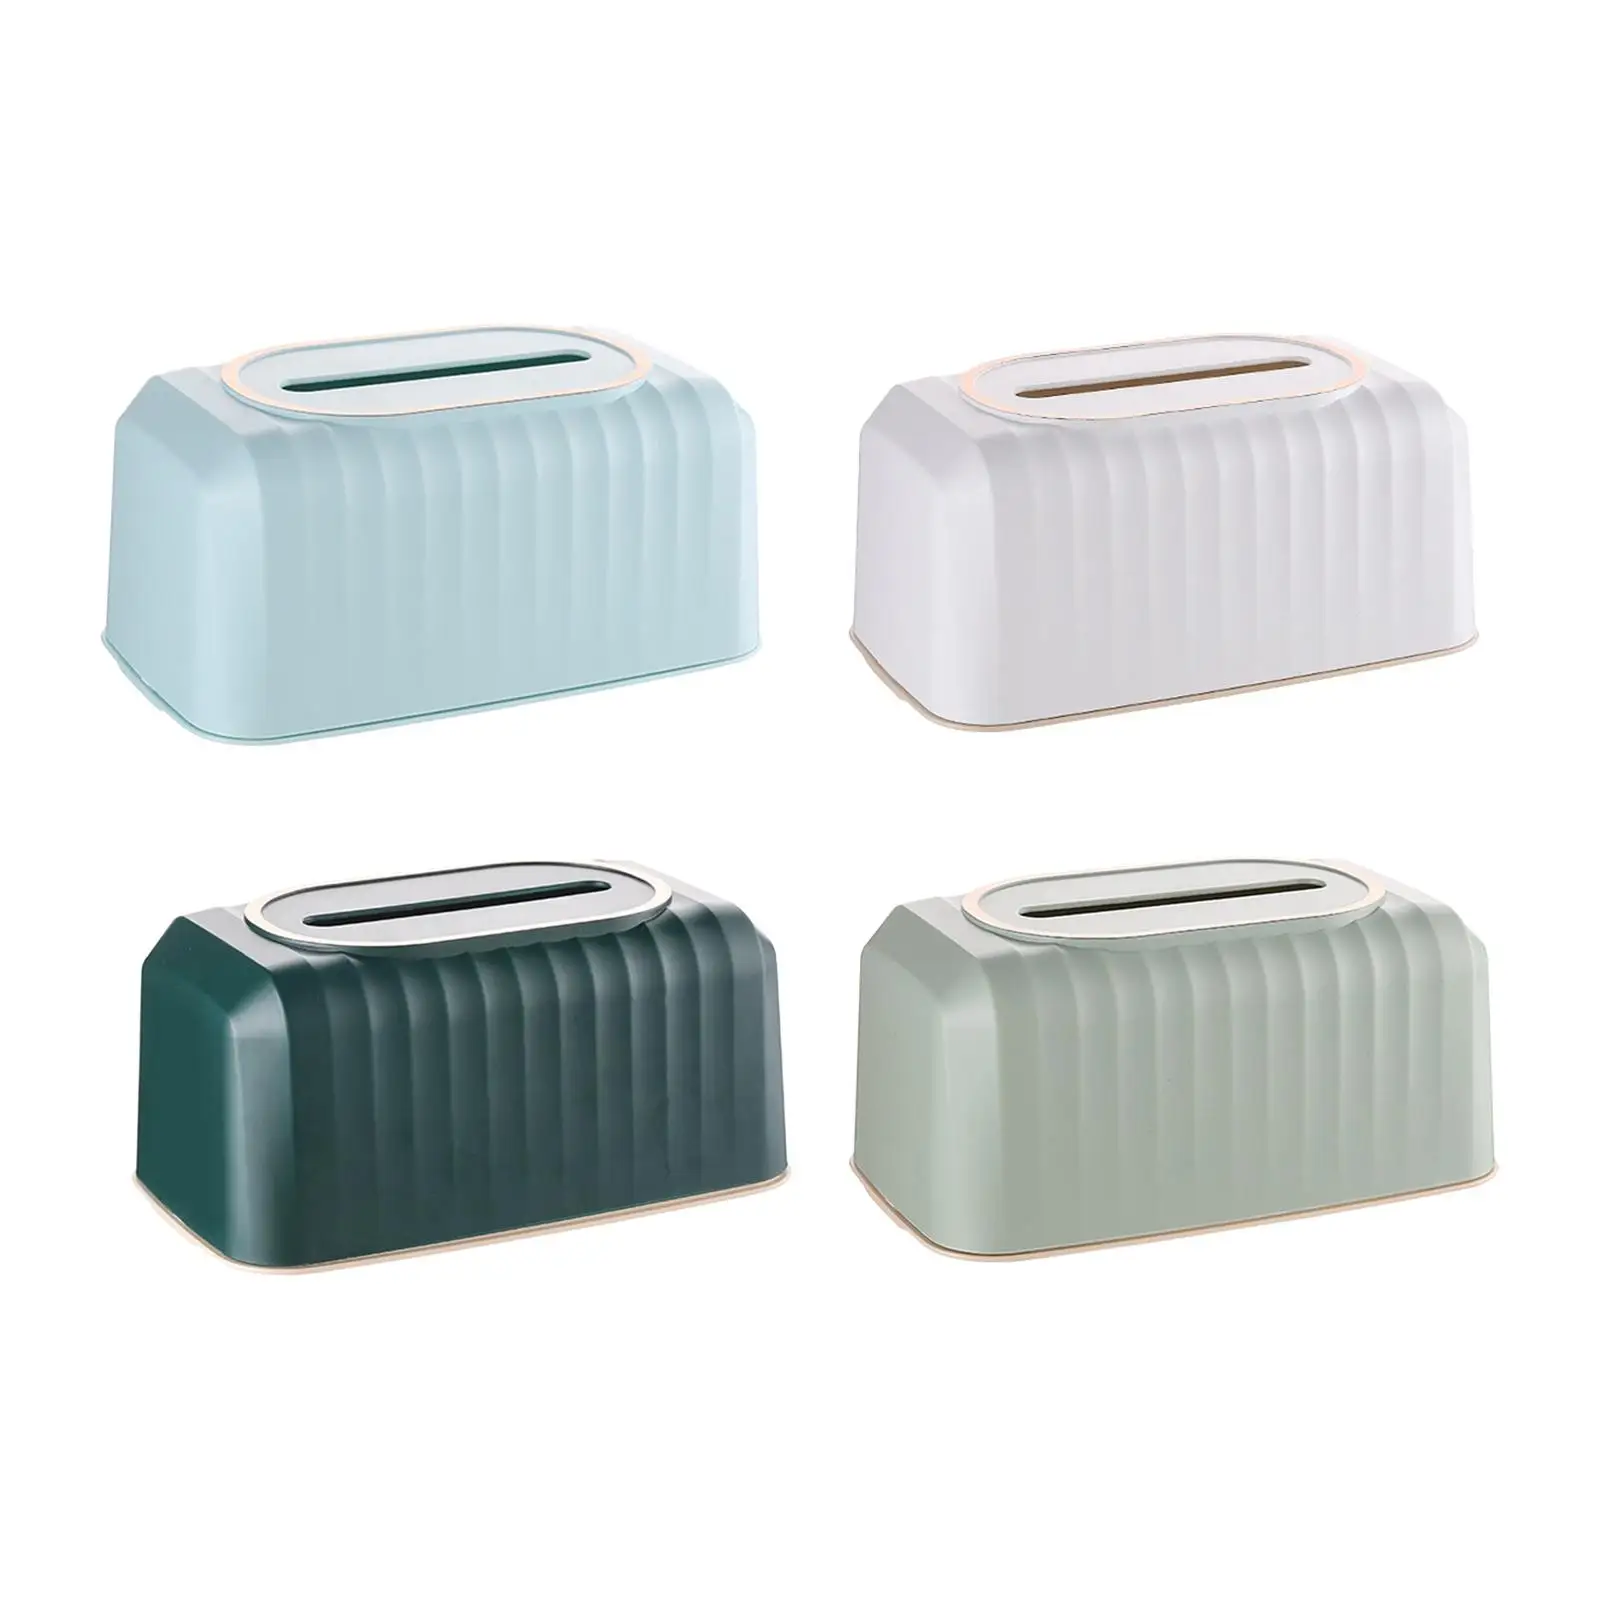 Striped Design Tissue Box Cover Case for Bathroom Dresser Widely Uses Decorative